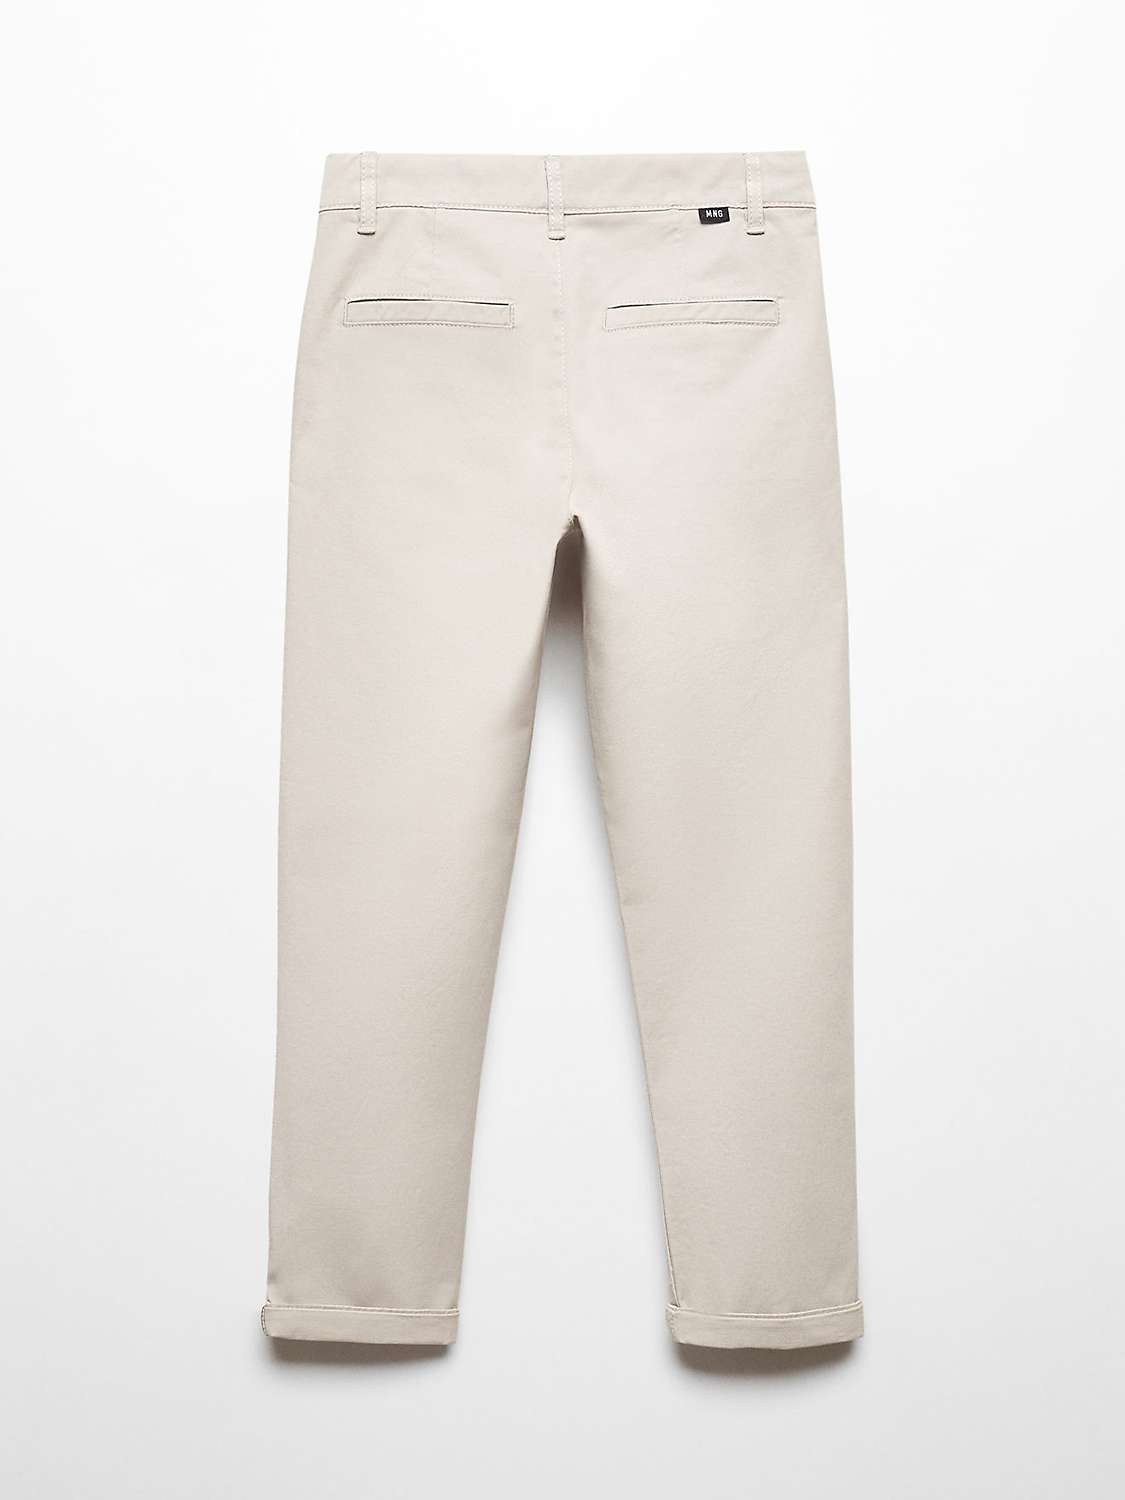 Buy Mango Kids' Piccolo Cotton Blend Chino Trousers Online at johnlewis.com